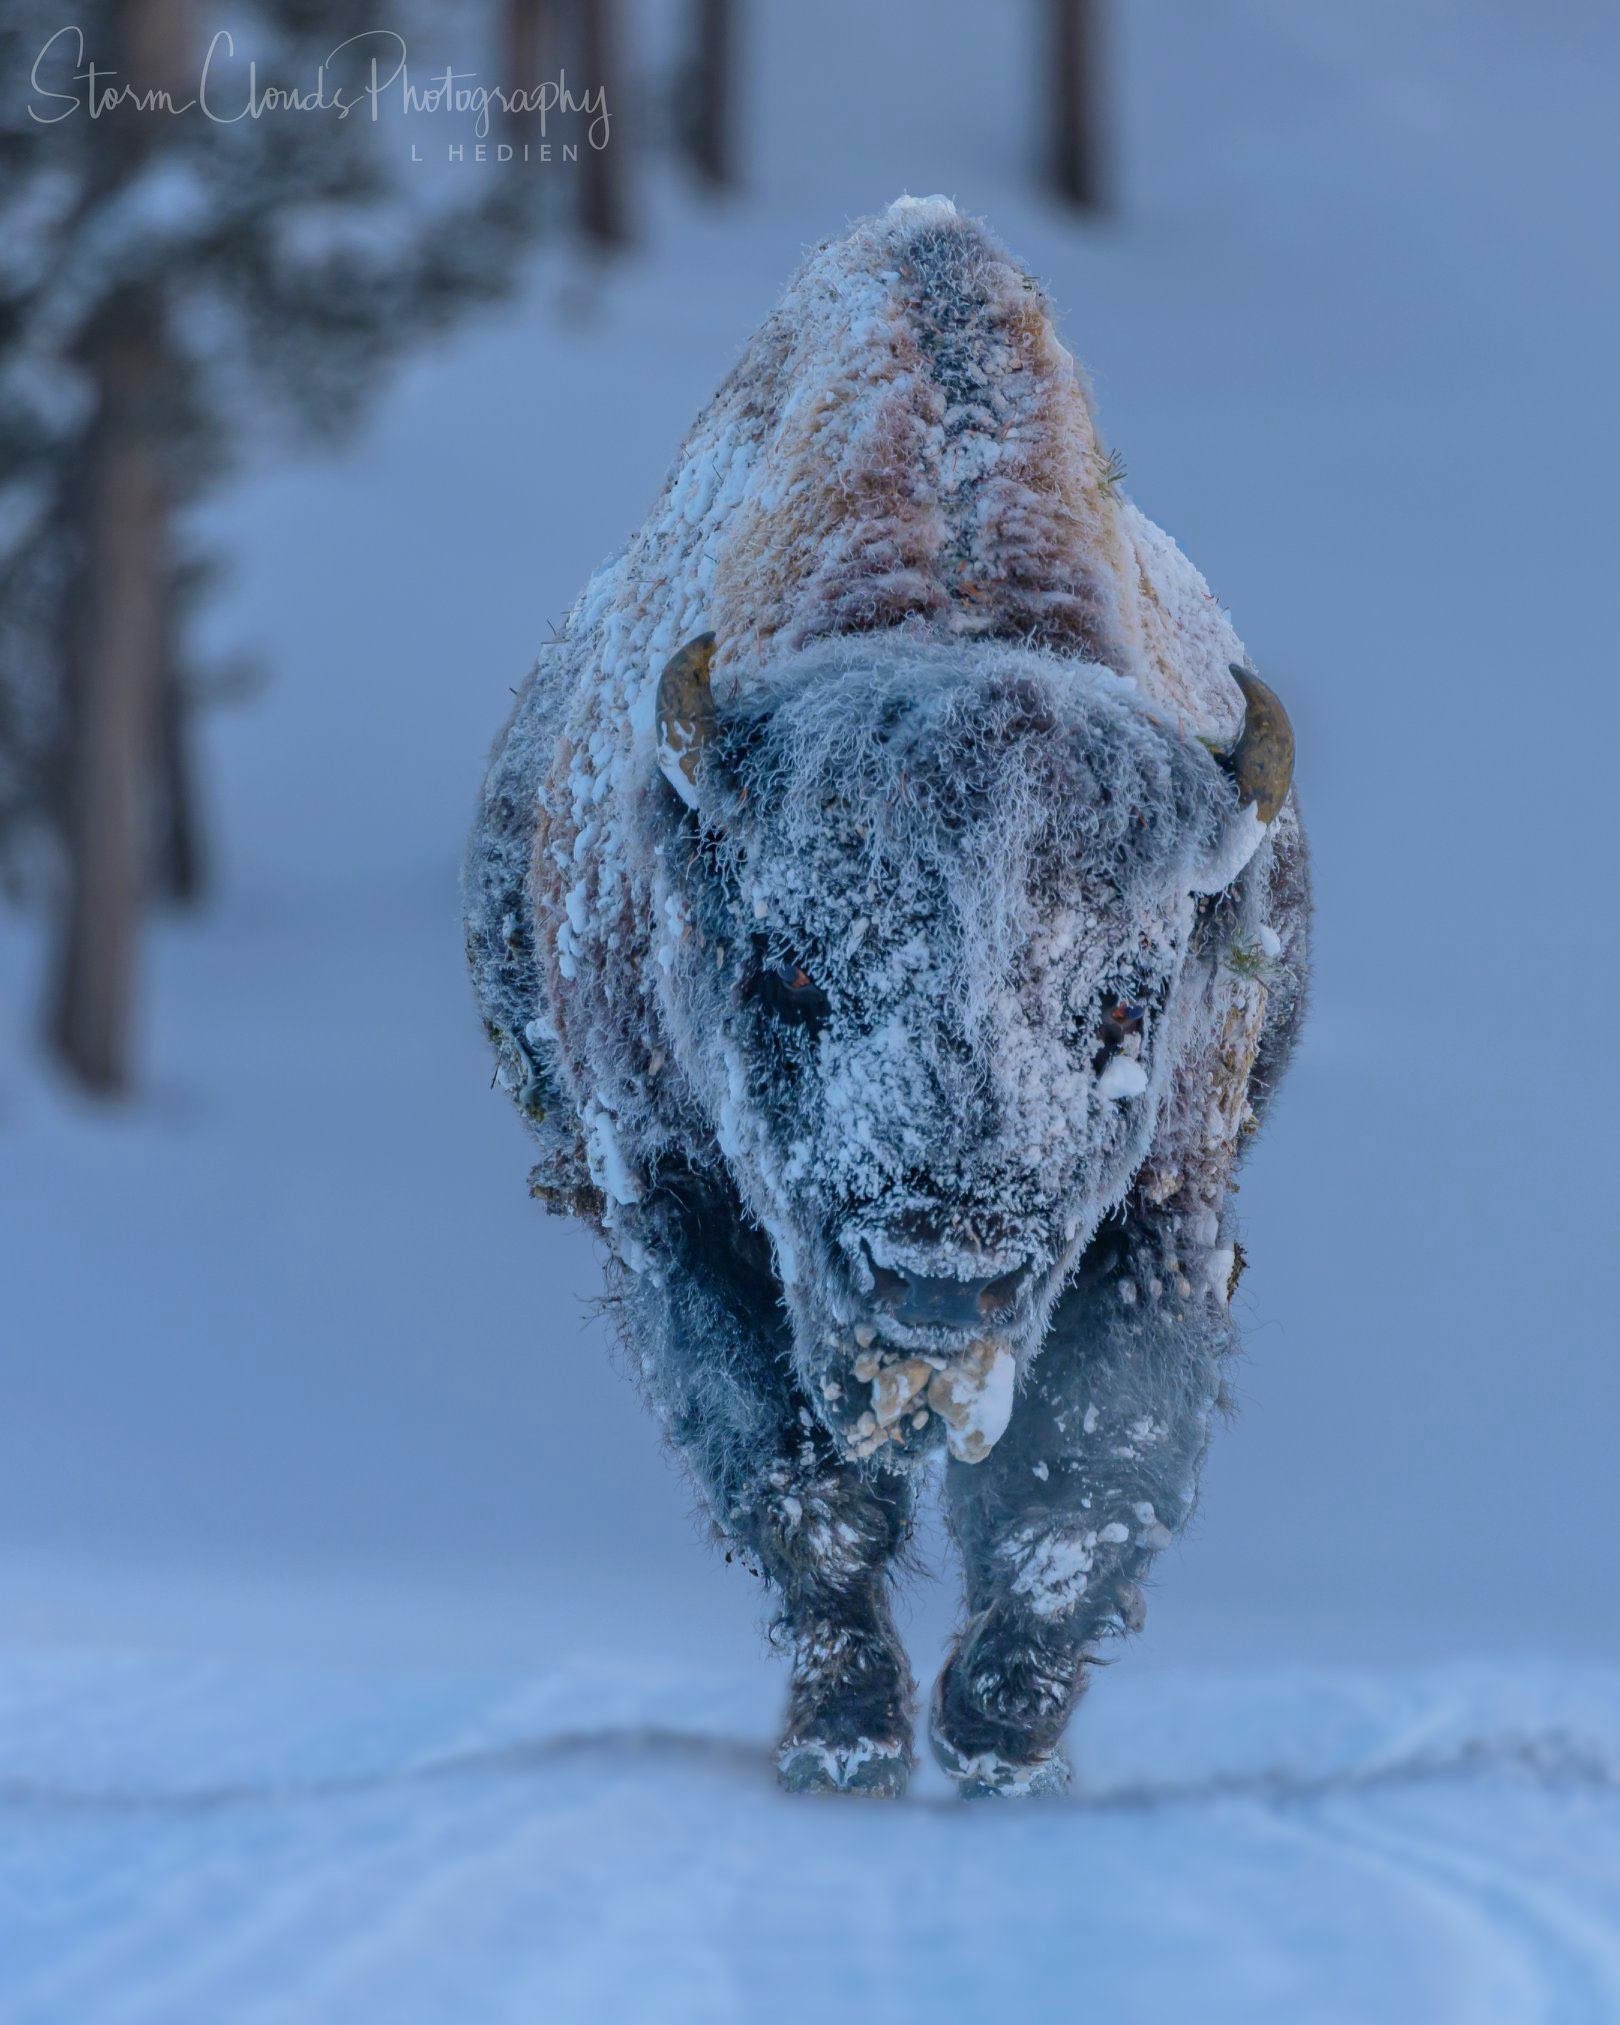 1st Place A frosty bison in Yellowstone by Laura Hedien- Storm Clouds Photography @lhedien